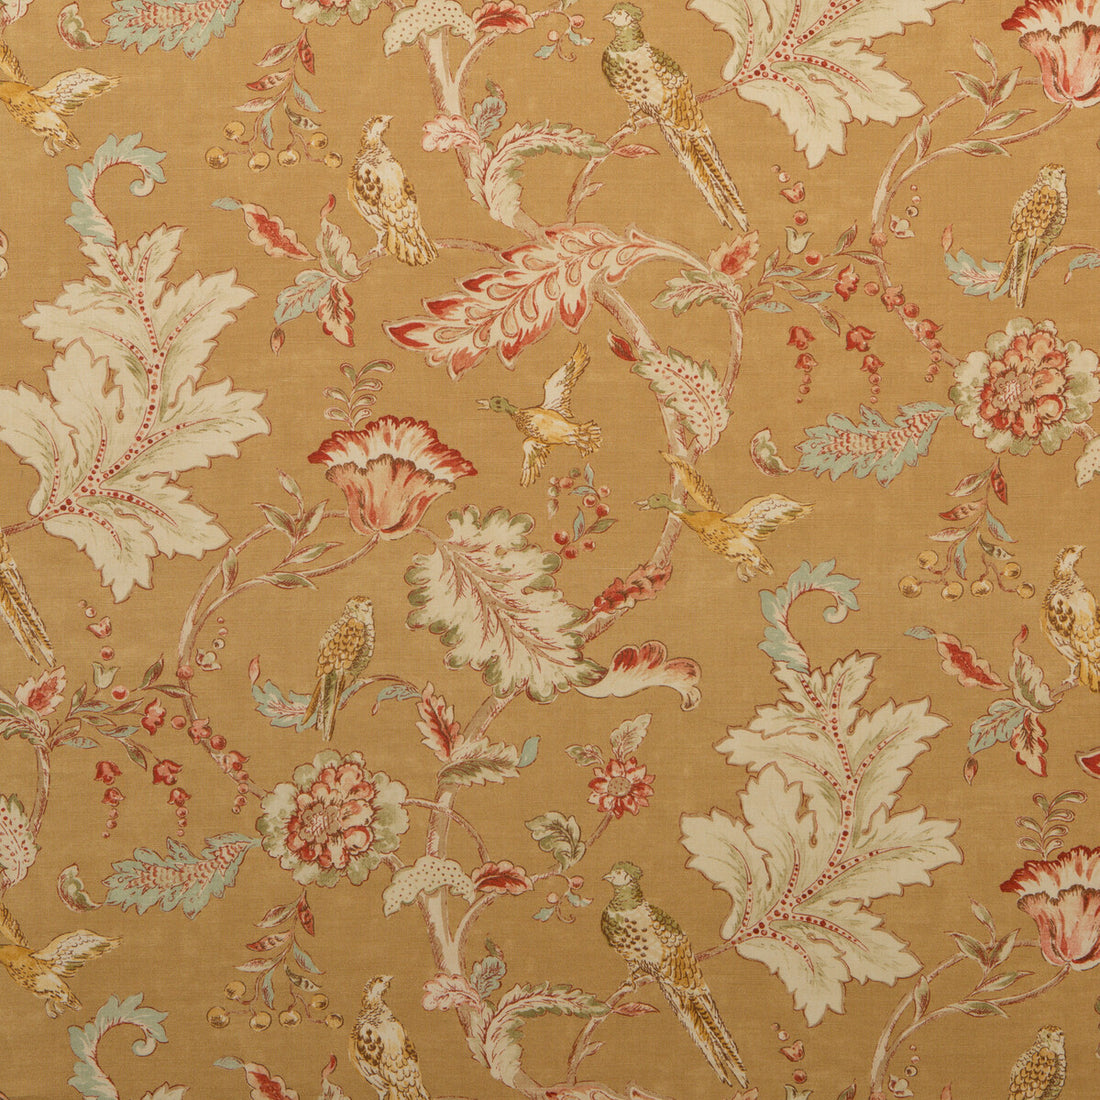 Early Birds fabric in sand color - pattern FD241.N102.0 - by Mulberry in the Grand Tour collection